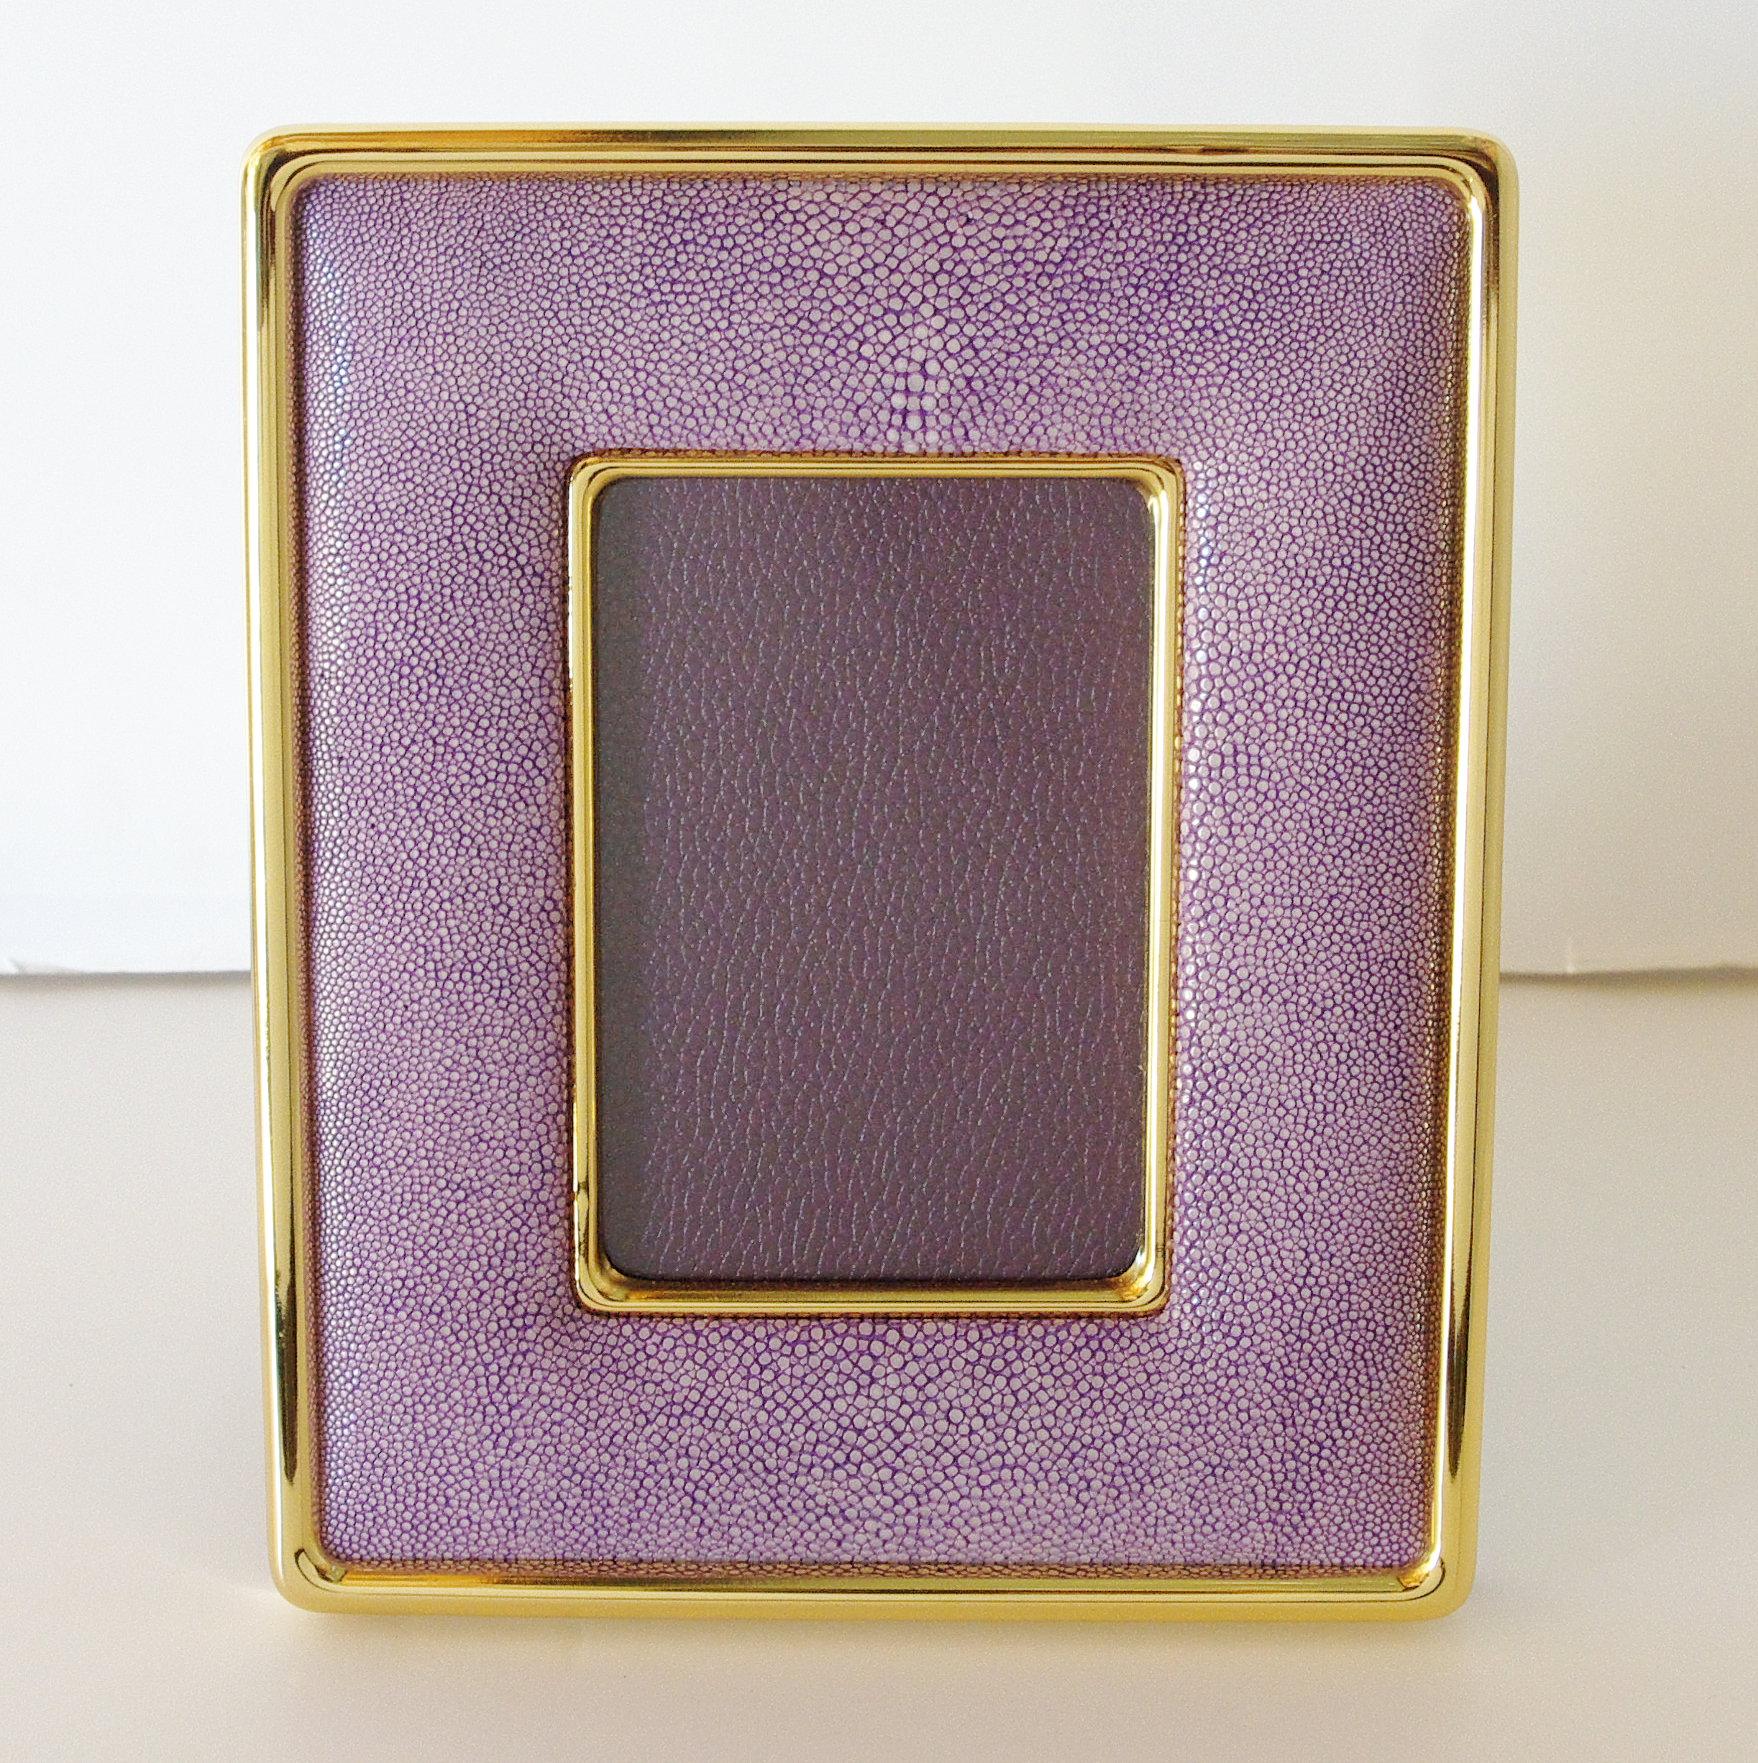 Lilac shagreen and gold-plated photo frame by Fabio Ltd
Measures: Height 8 inches, width 7 inches, depth 1 inch
For photo size: 4 inches x 6 inches
1 in stock in Palm Springs currently ON HOLIDAY SALE for $499 !!!
Order Referece #: FABIOLTD